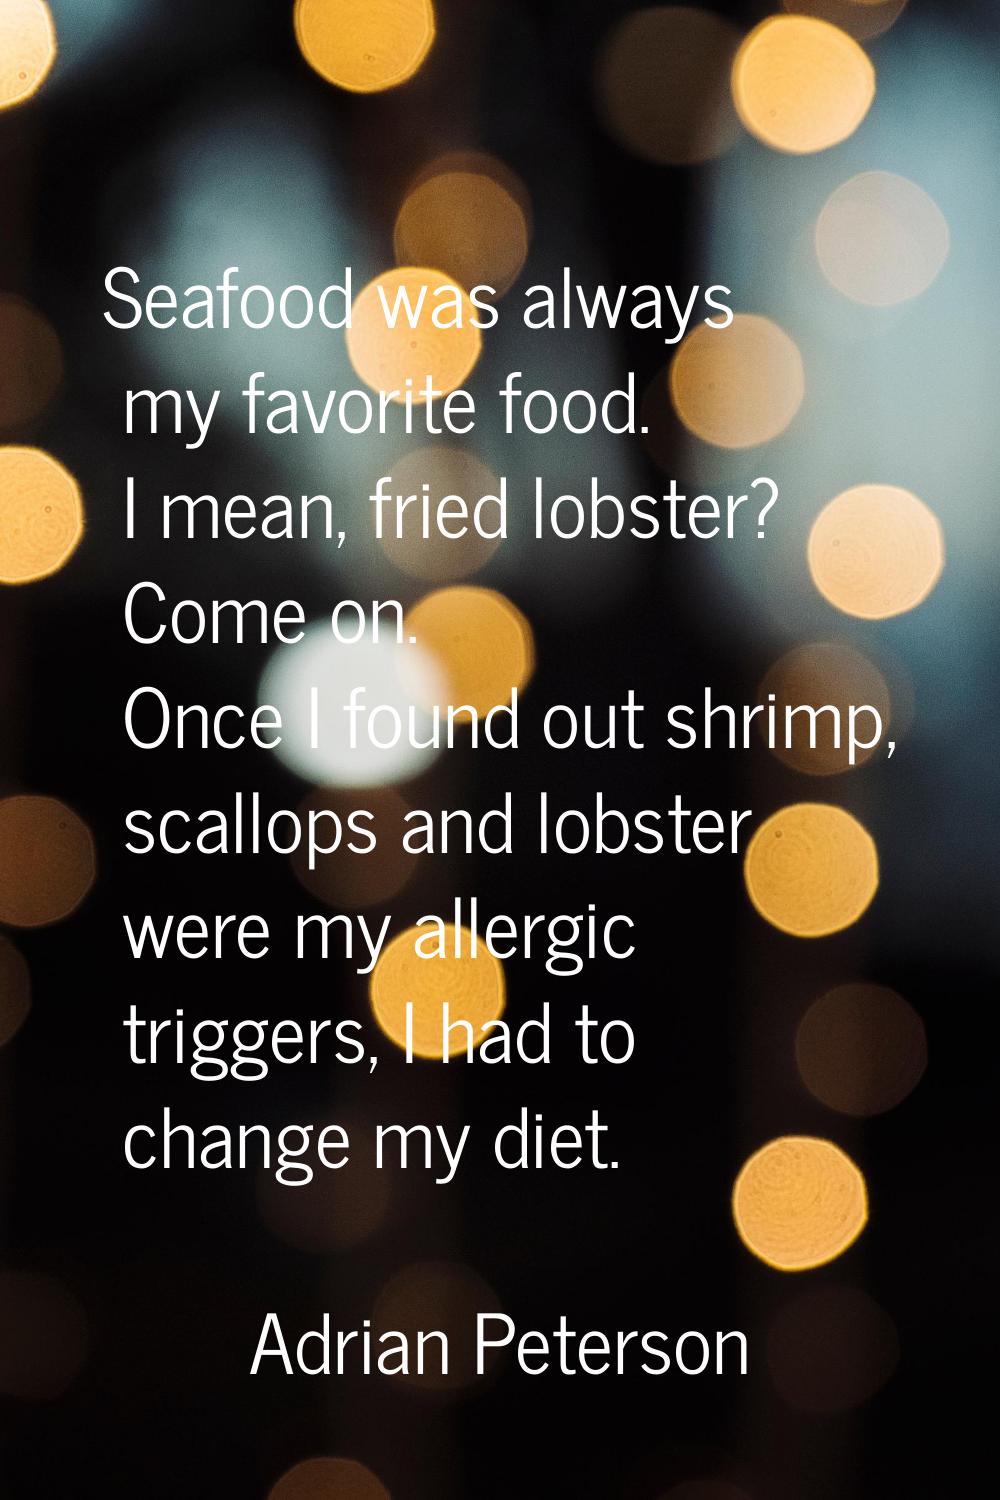 Seafood was always my favorite food. I mean, fried lobster? Come on. Once I found out shrimp, scall